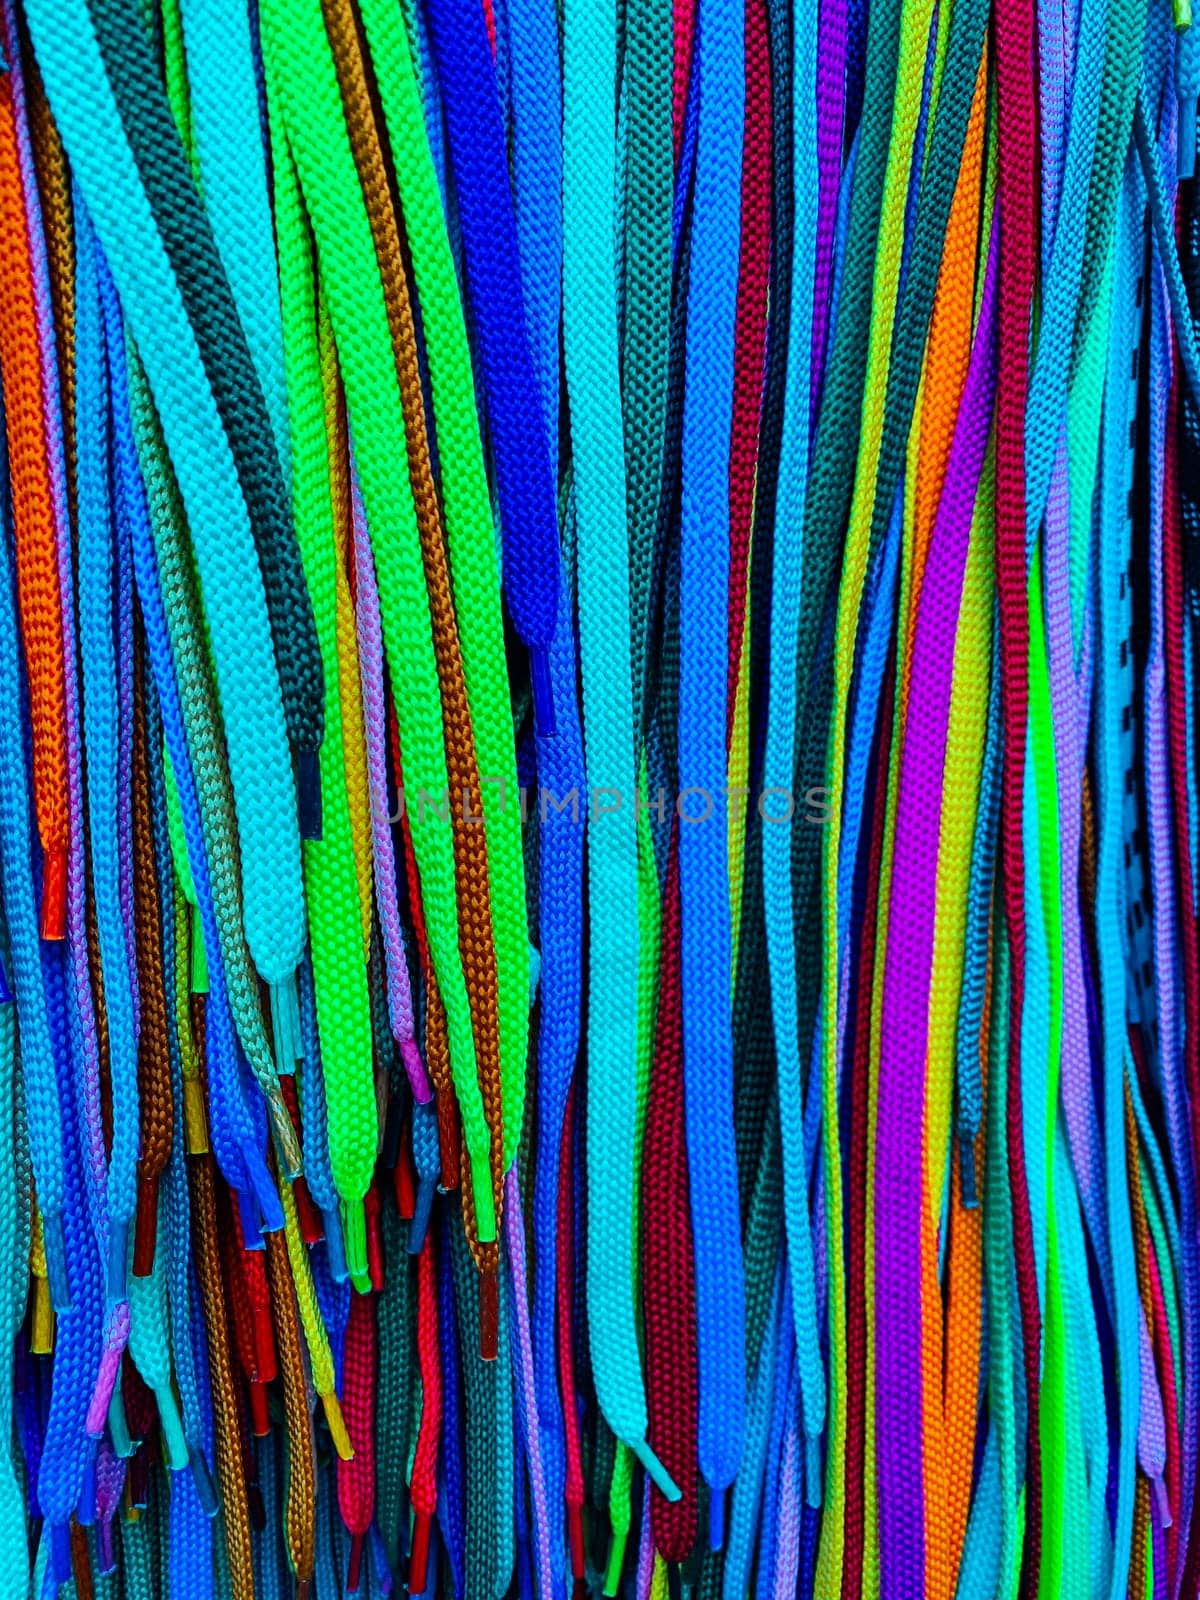 Lots of multi-colored shoelaces as a colored background by Simakov